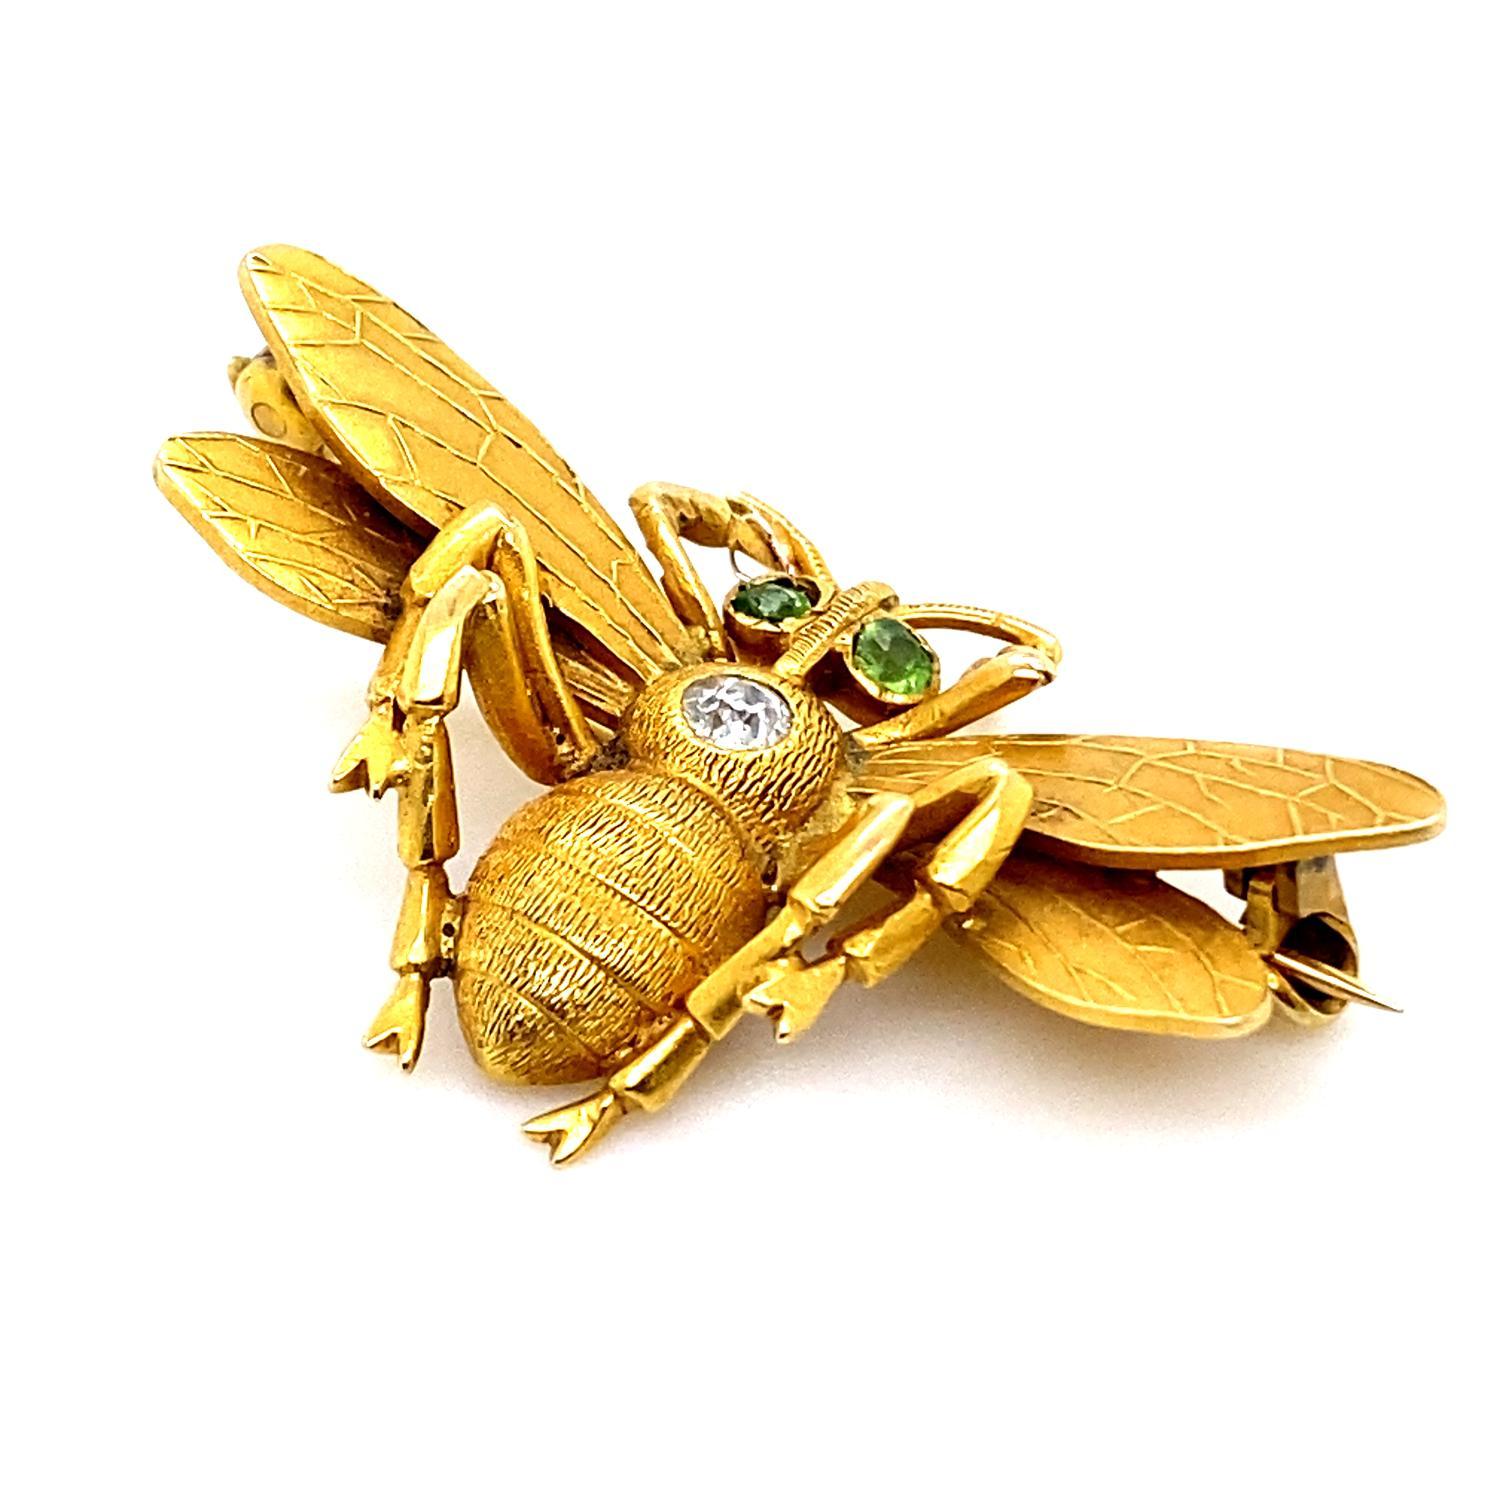 A vintage Art Nouveau style bee brooch pin set in 18 karat yellow gold.

Designed in yellow gold, its head is set with two brightly hued round cut peridots for eyes. The thorax of the bee is set to its centre with a single old cut diamond of 0.20